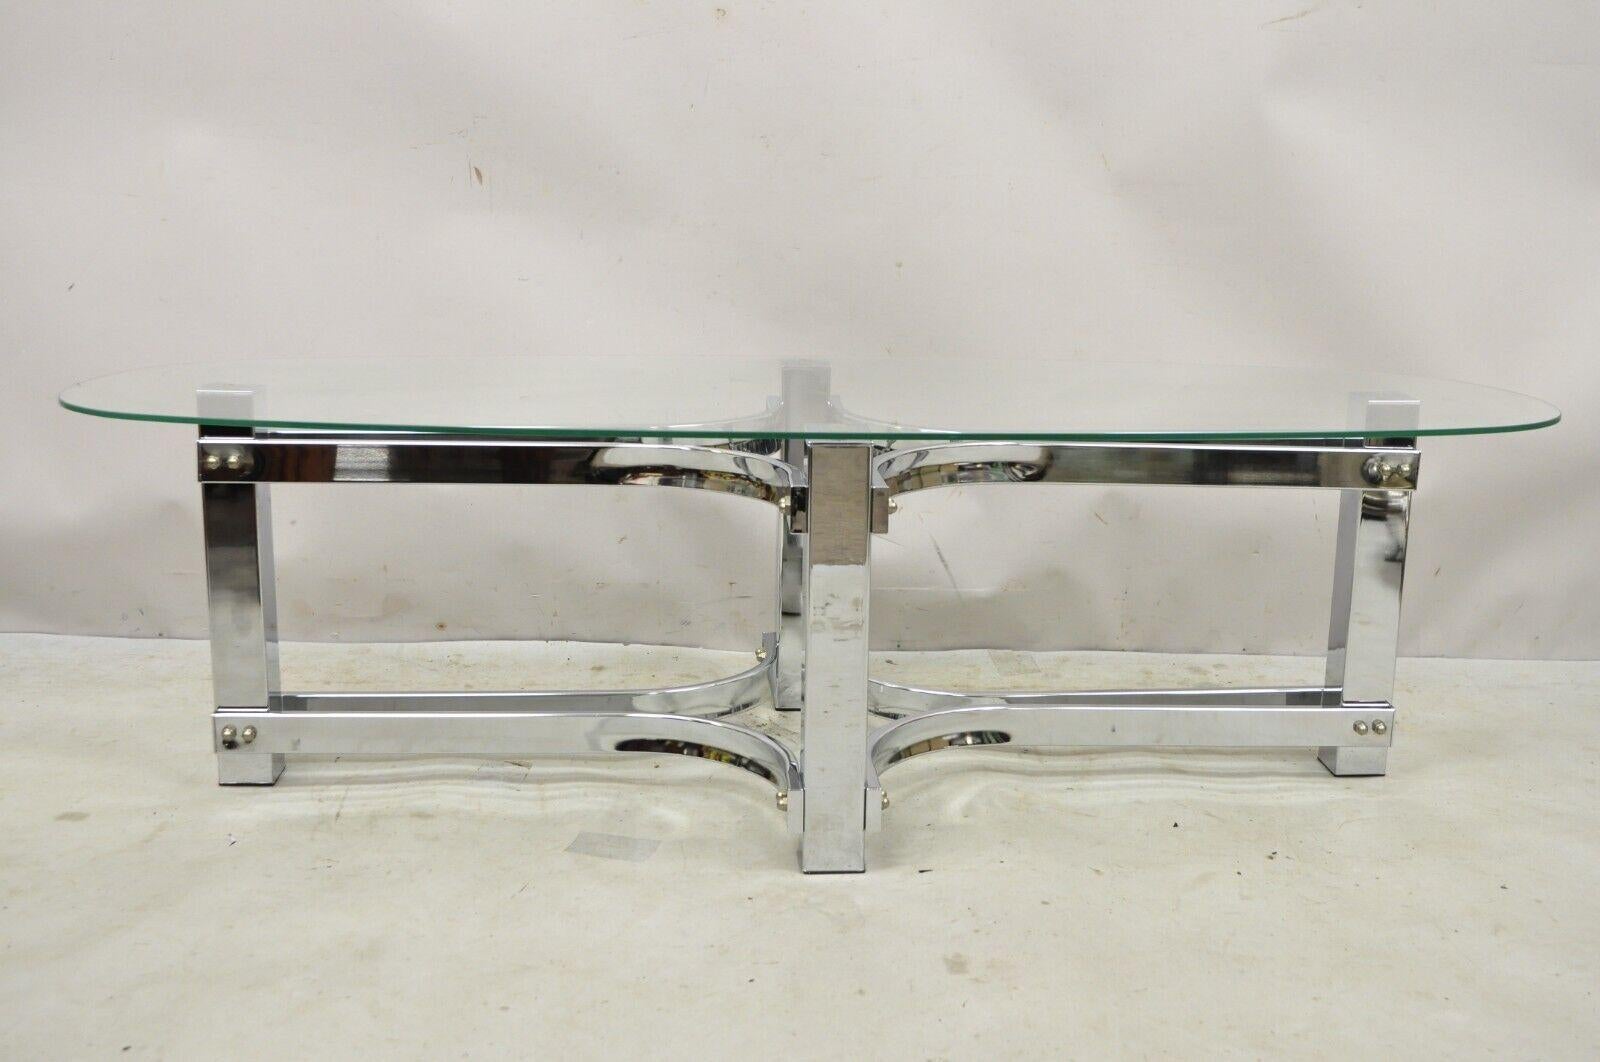 Vintage Mid Century Modern Oval Glass Top Sculptural Chrome Frame Coffee Table. Item features an oval glass top, sculptural chrome pedestal base, very nice vintage item, great style and form. Circa Late 20th Century. Measurements: 14.5